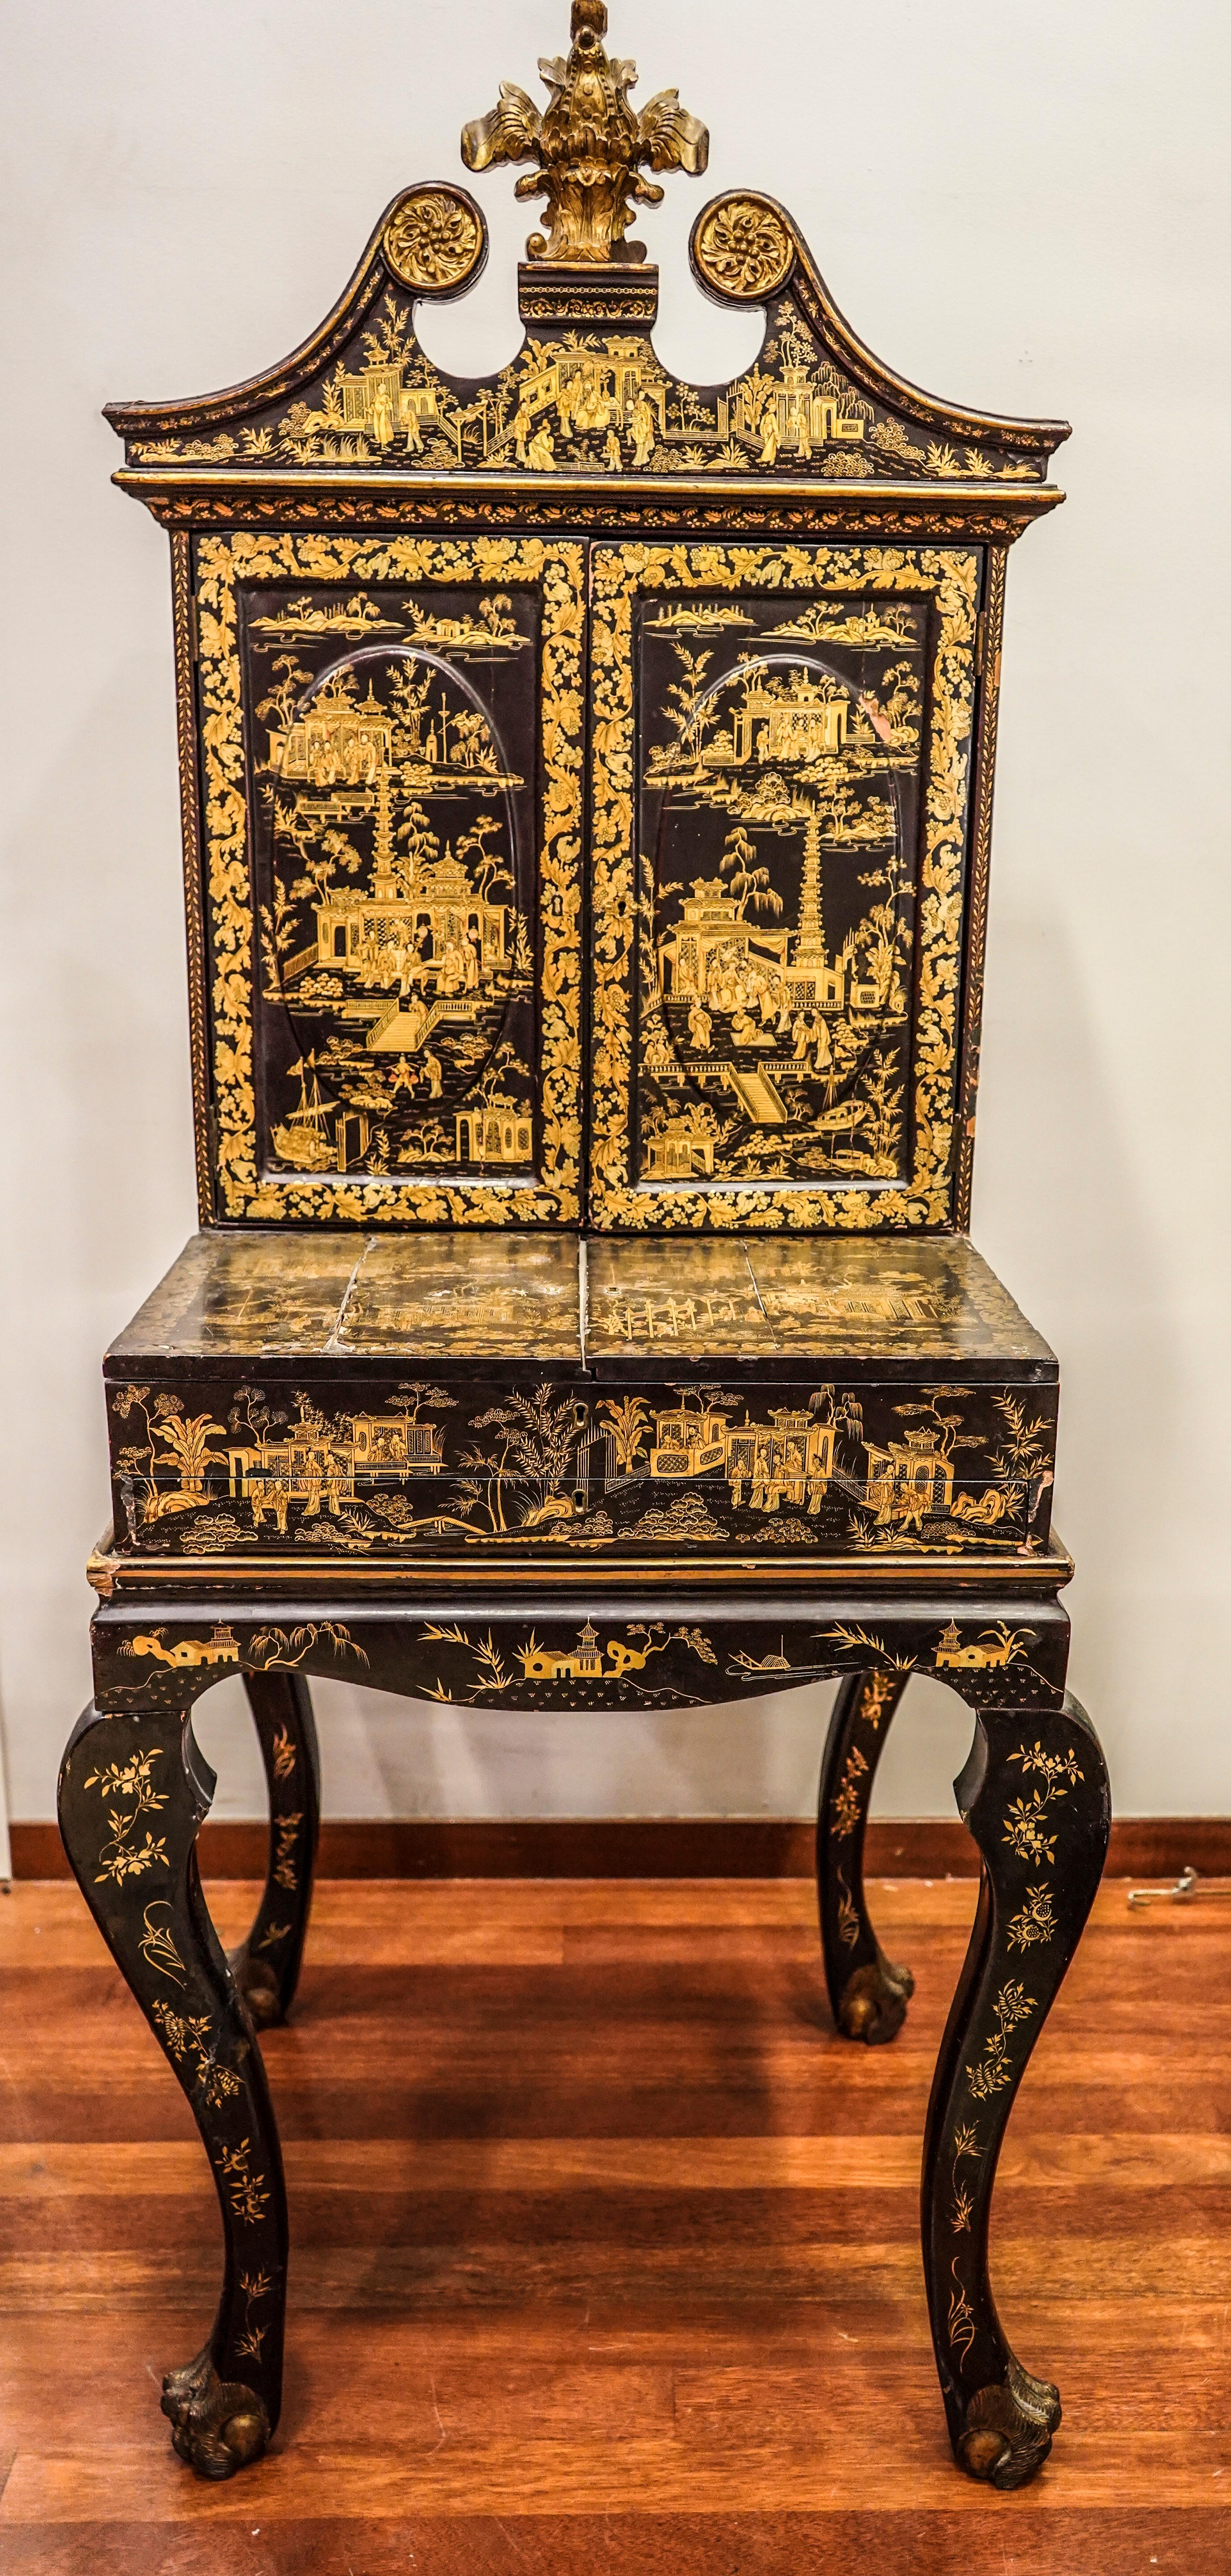 Stunning lacquered with chinoiseries Chinois cabinet made ordered to be exported and then the console was custom made in England .
Its a amazing piece with a lot of drawers and desk at the bottom. It has an extraordinary quality in the designs with